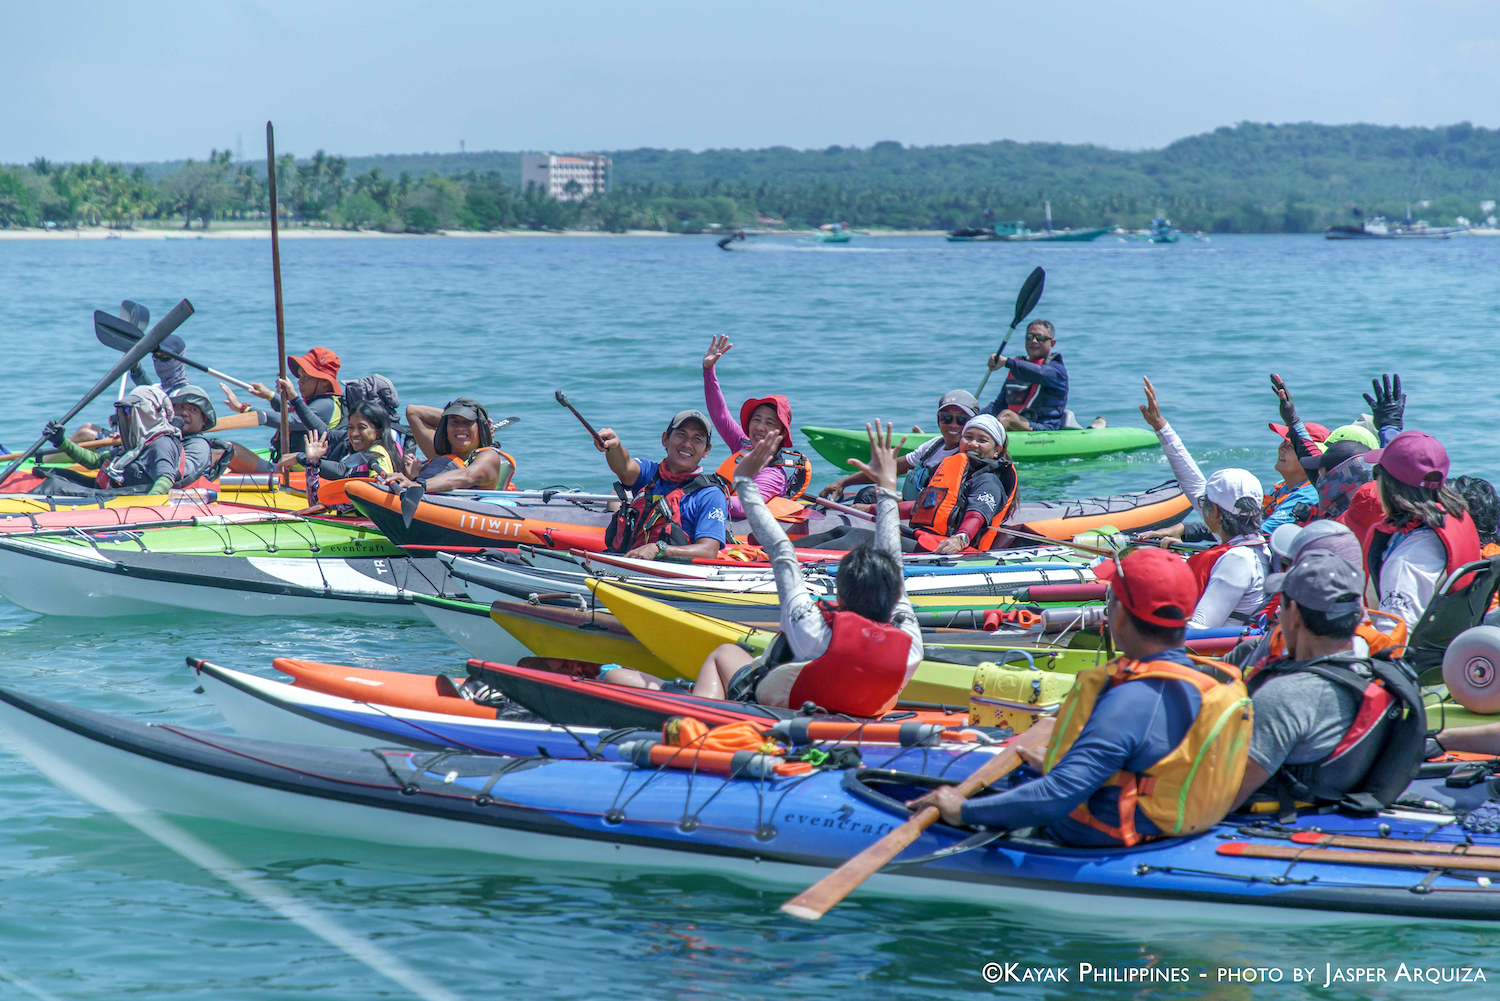 Paddlers from Cagayan de Oro, Sorsogon, Palawan, and Kayak Asia Bohol sharing a light moment out in the sea